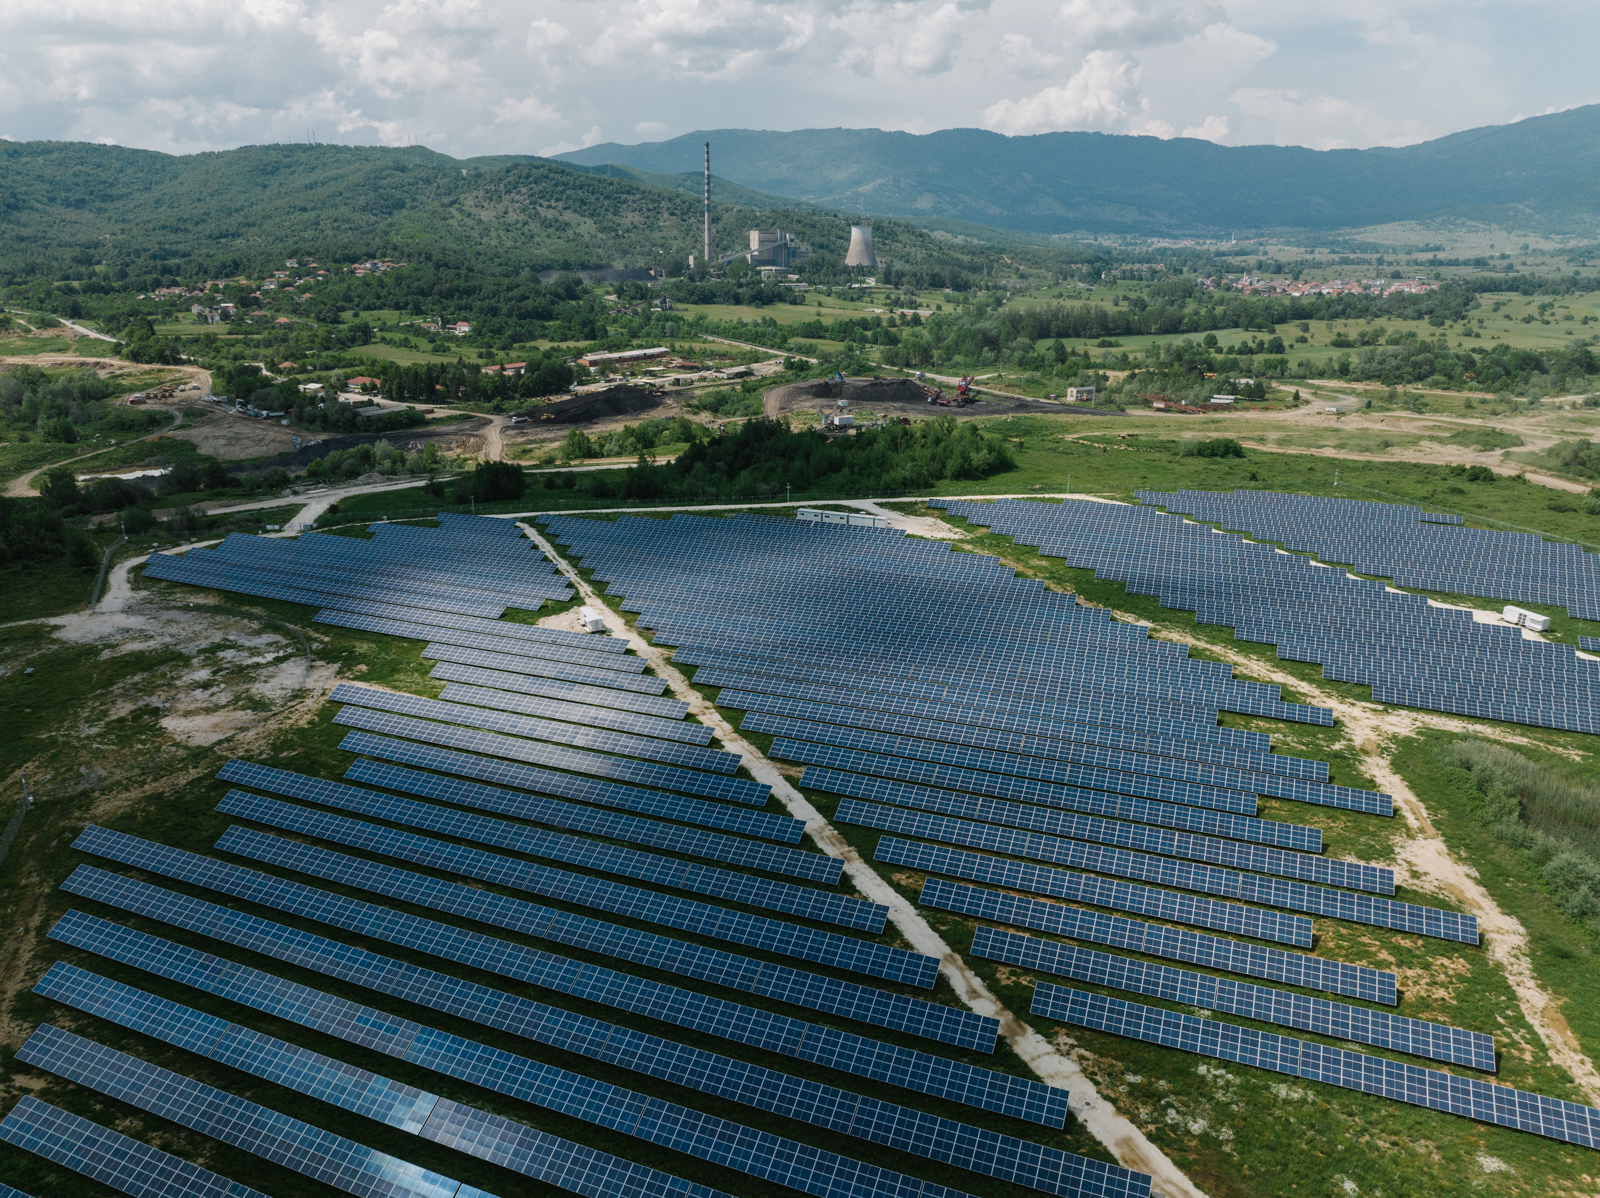 Aerial view of a field of solar panels in a wide, green landscape.